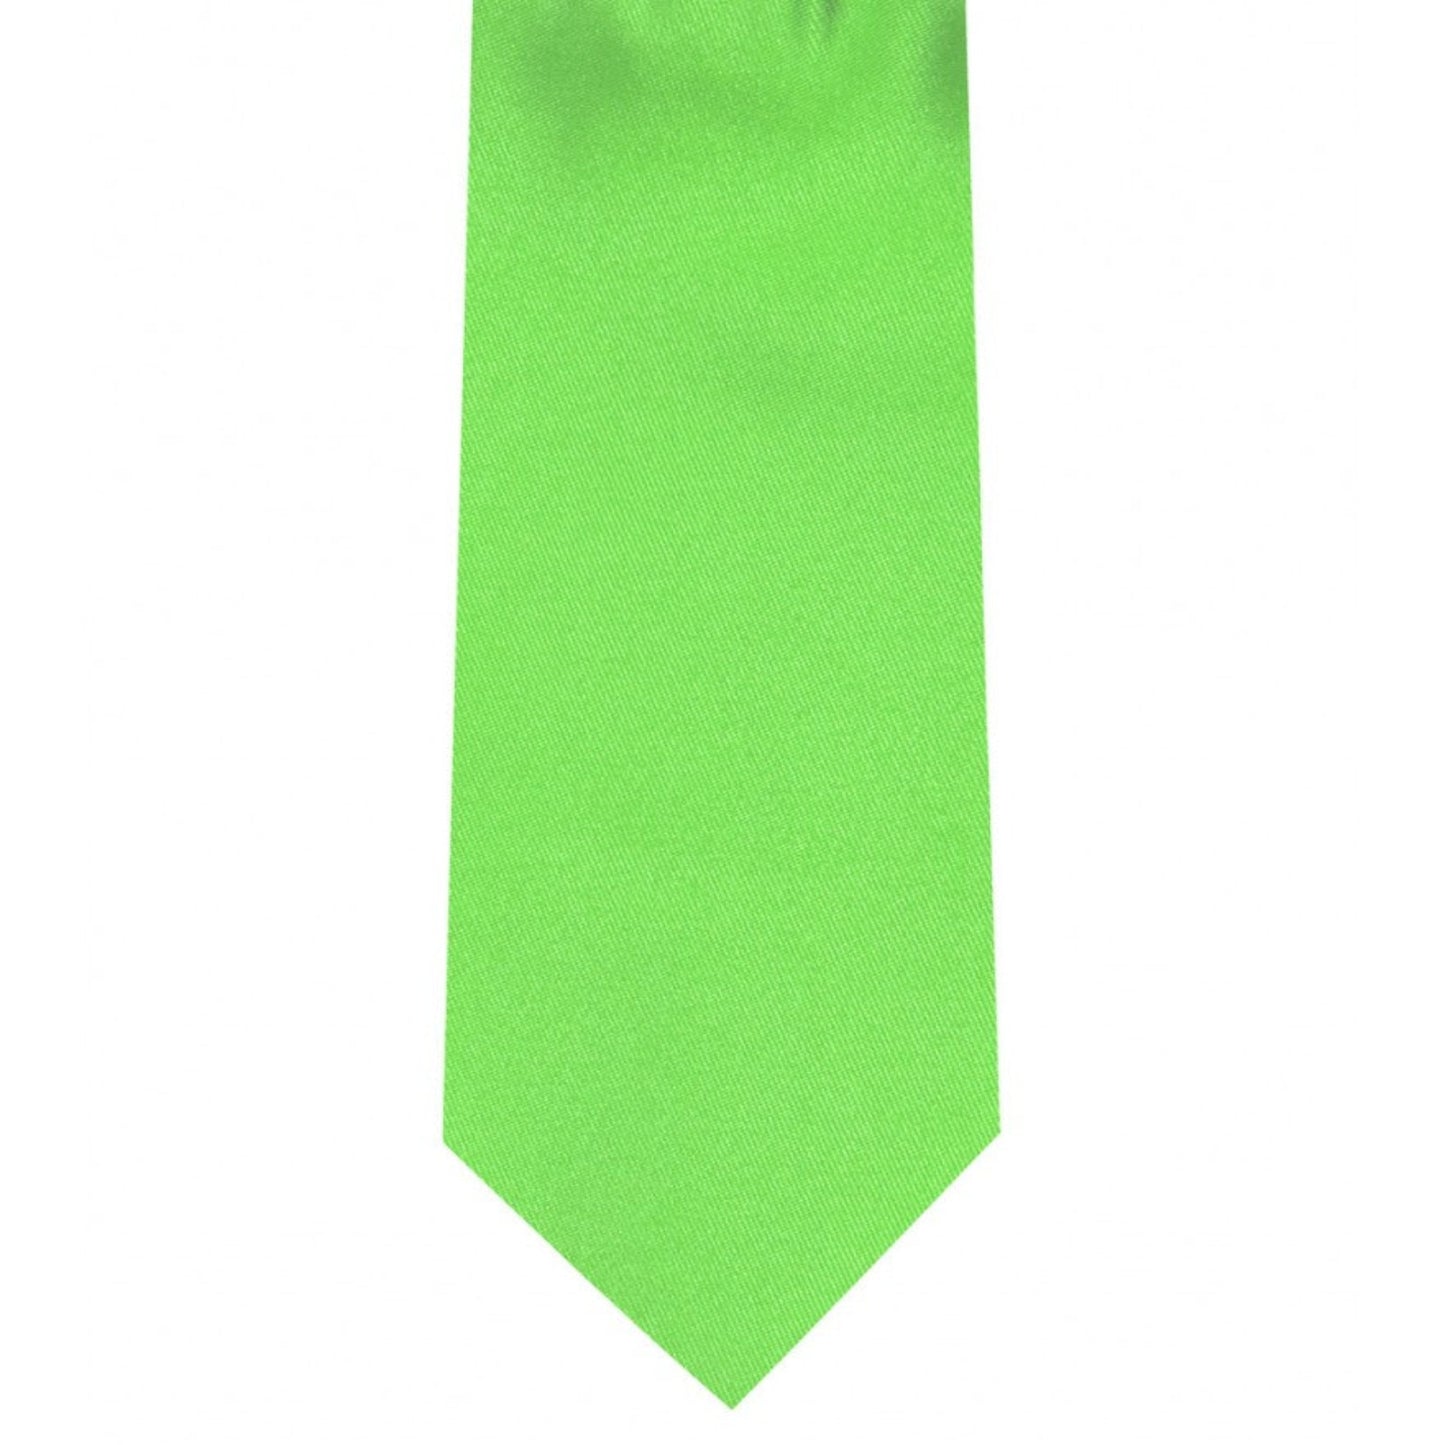 Classic Lettuce Green Tie Ultra Skinny tie width 2.25 inches With Matching Pocket Square | KCT Menswear